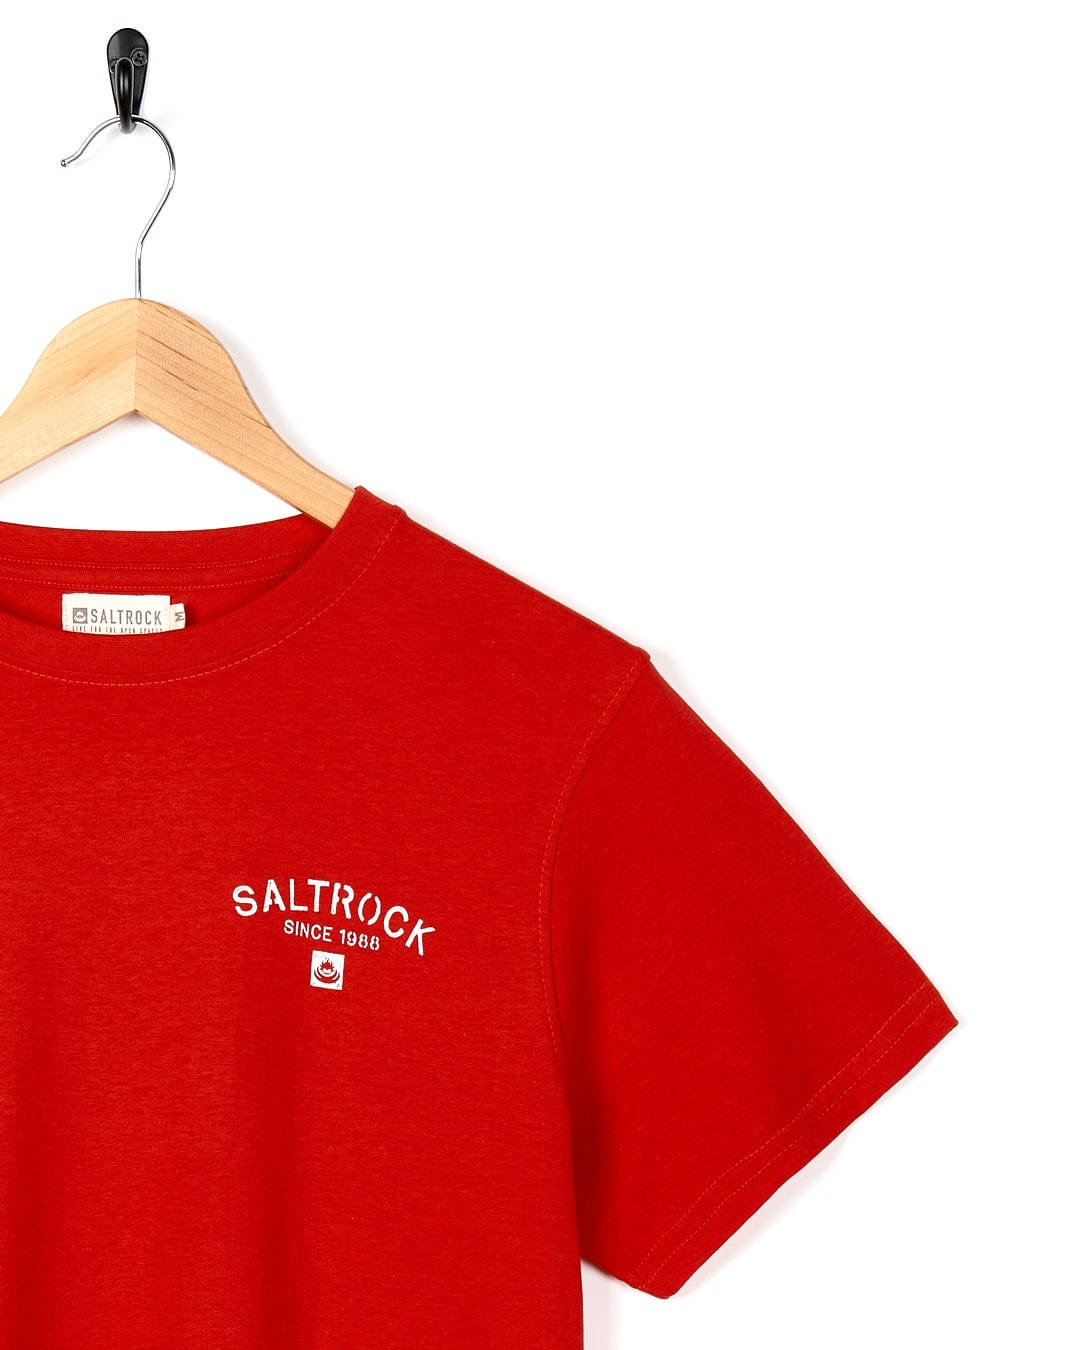 A Stencil - Mens Location T-Shirt - Poole - Red with the word Saltrock on it.